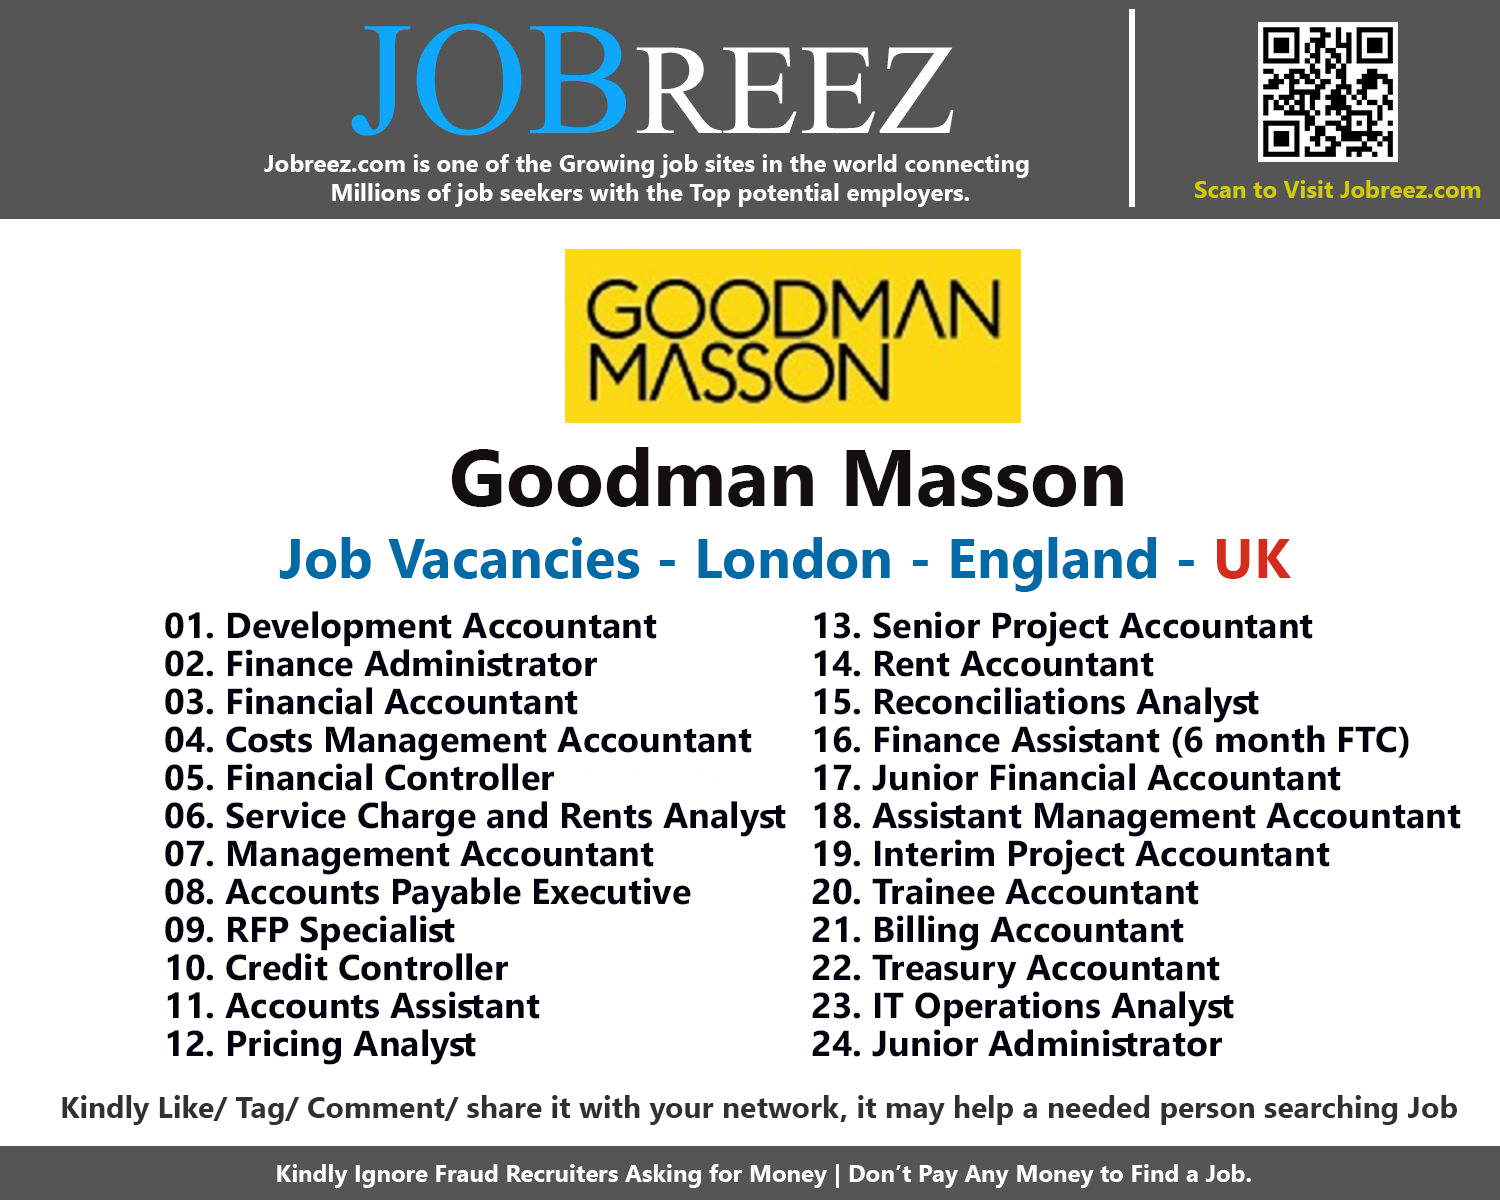 Goodman Masson Job Vacancies - London, England, UK. Also, We are going to describe to you the ways to get a job in Goodman Masson - London, England, UK